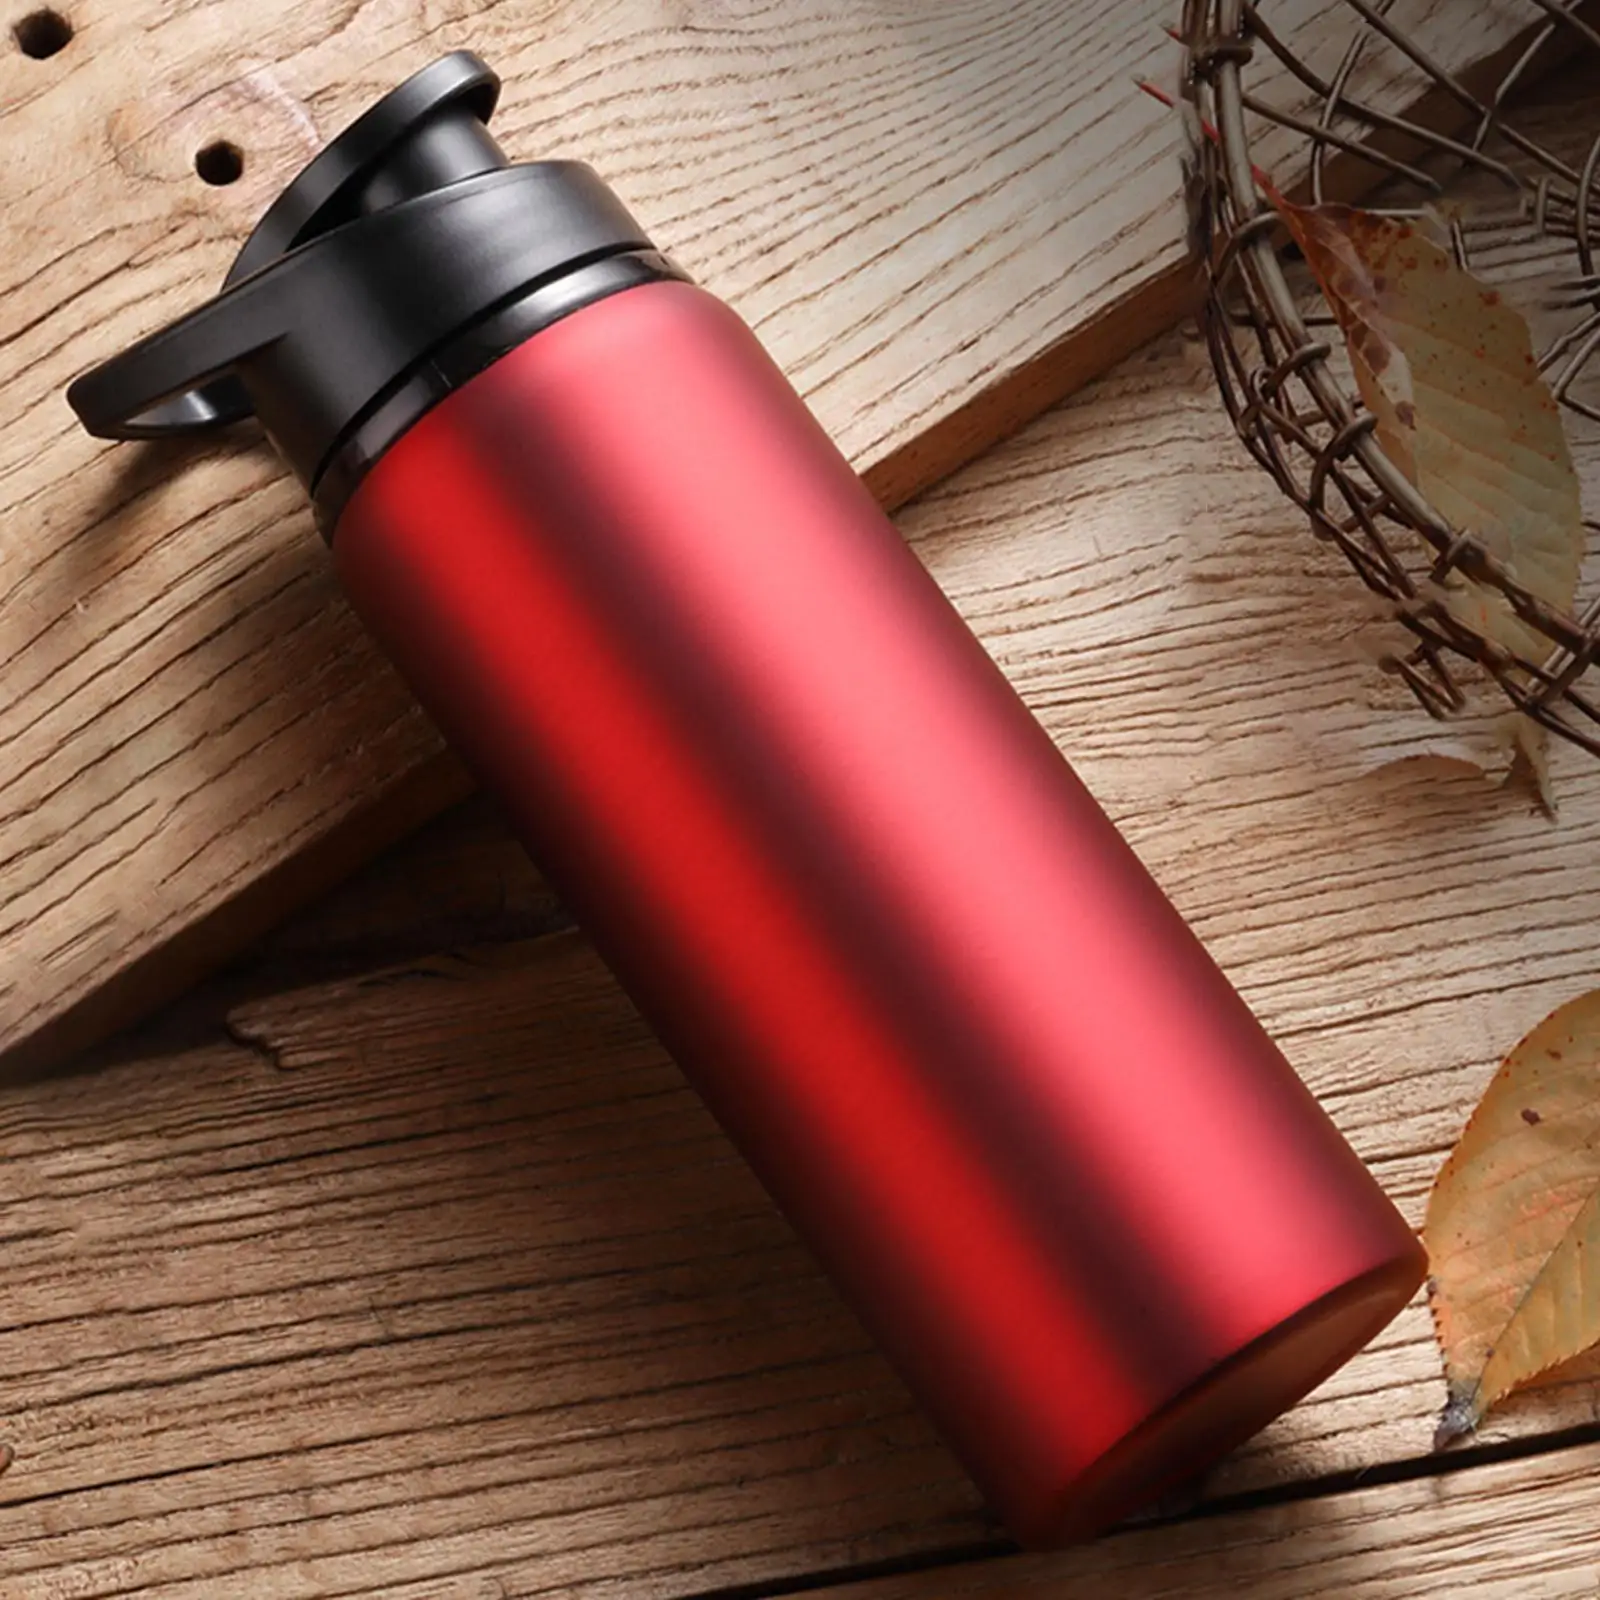 Portable Water Bottle Drinking for Outdoor Fitness Workout Cycling Travel